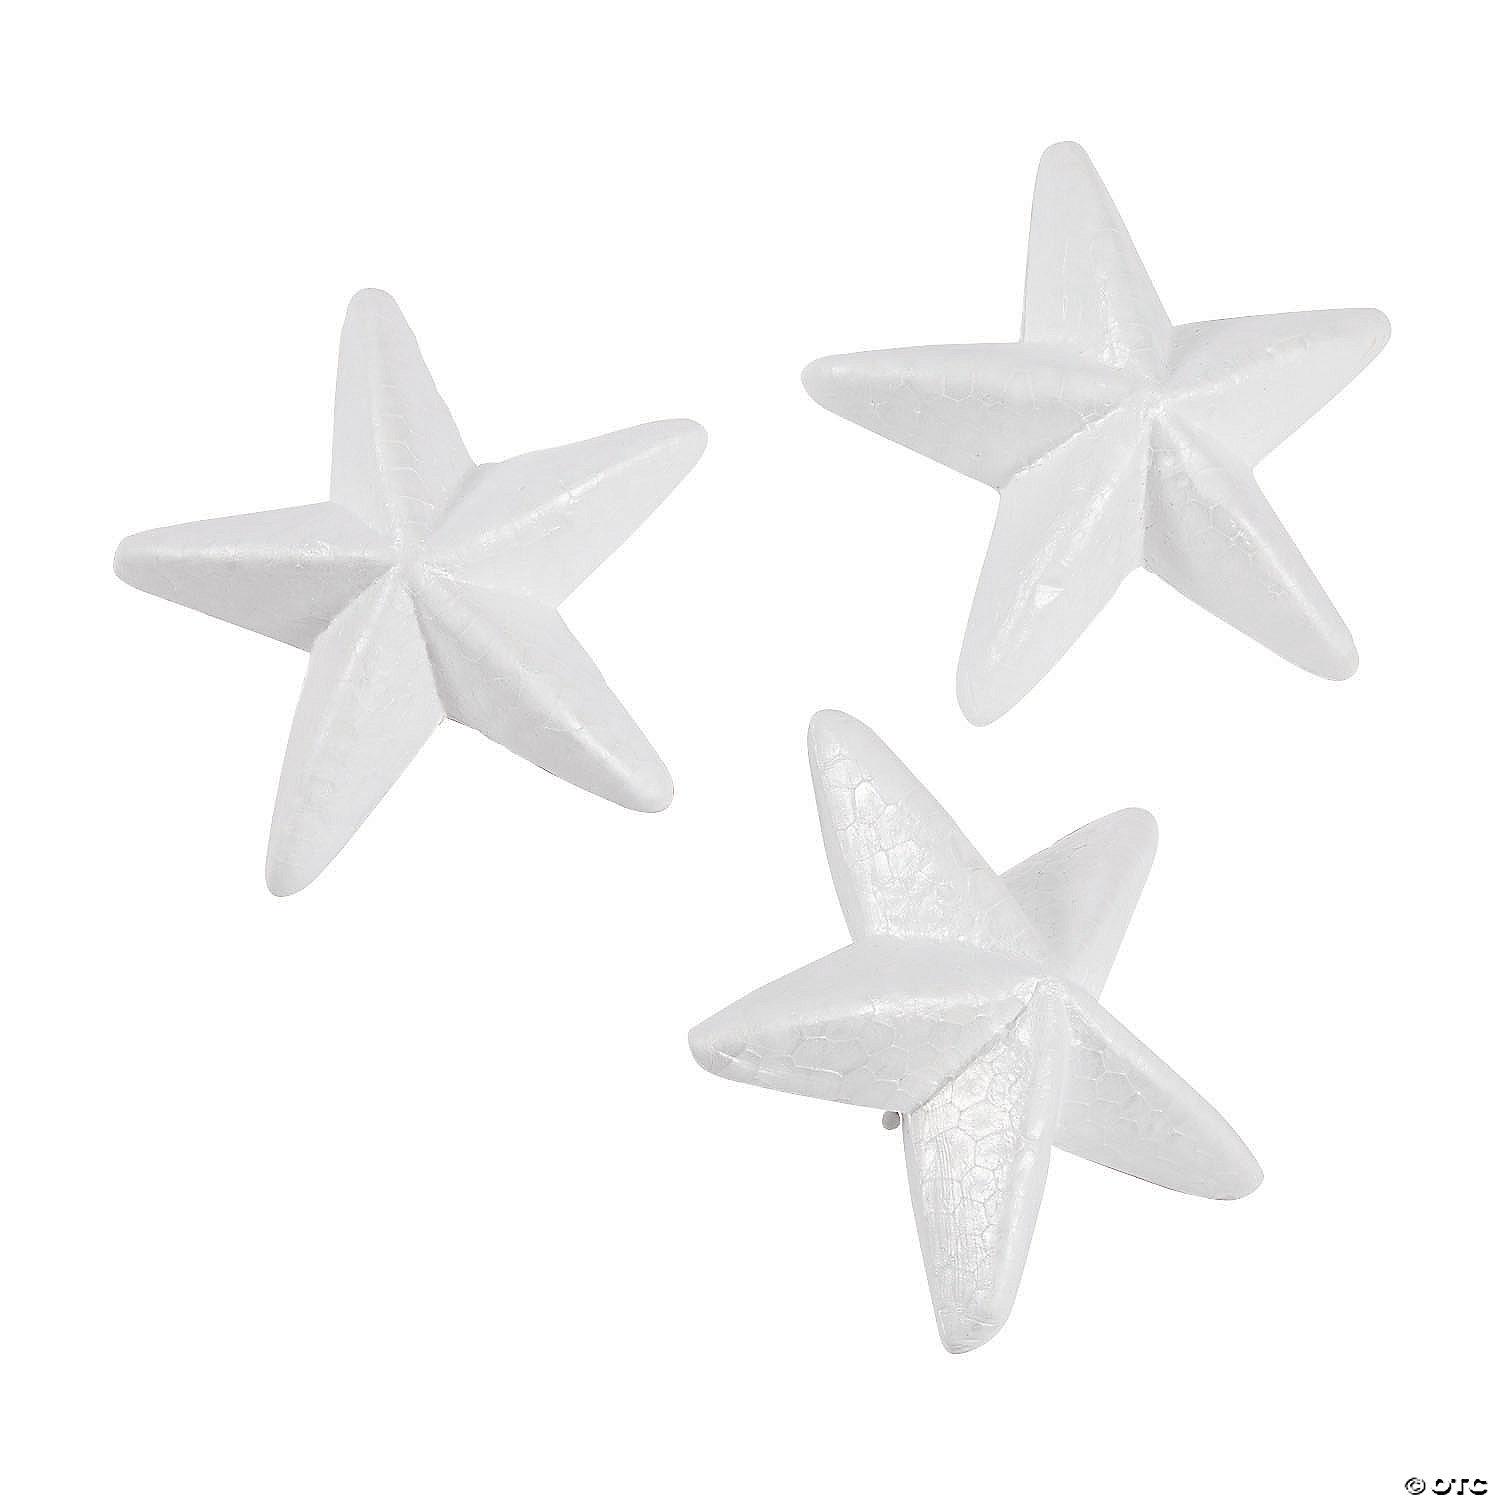 2.3 x 0.875 x 2.3 inches Makes DIY Ornaments and Decorations White 24-Piece Star-Shaped Polystyrene Foam for Arts and Craft Use Craft Foam Stars